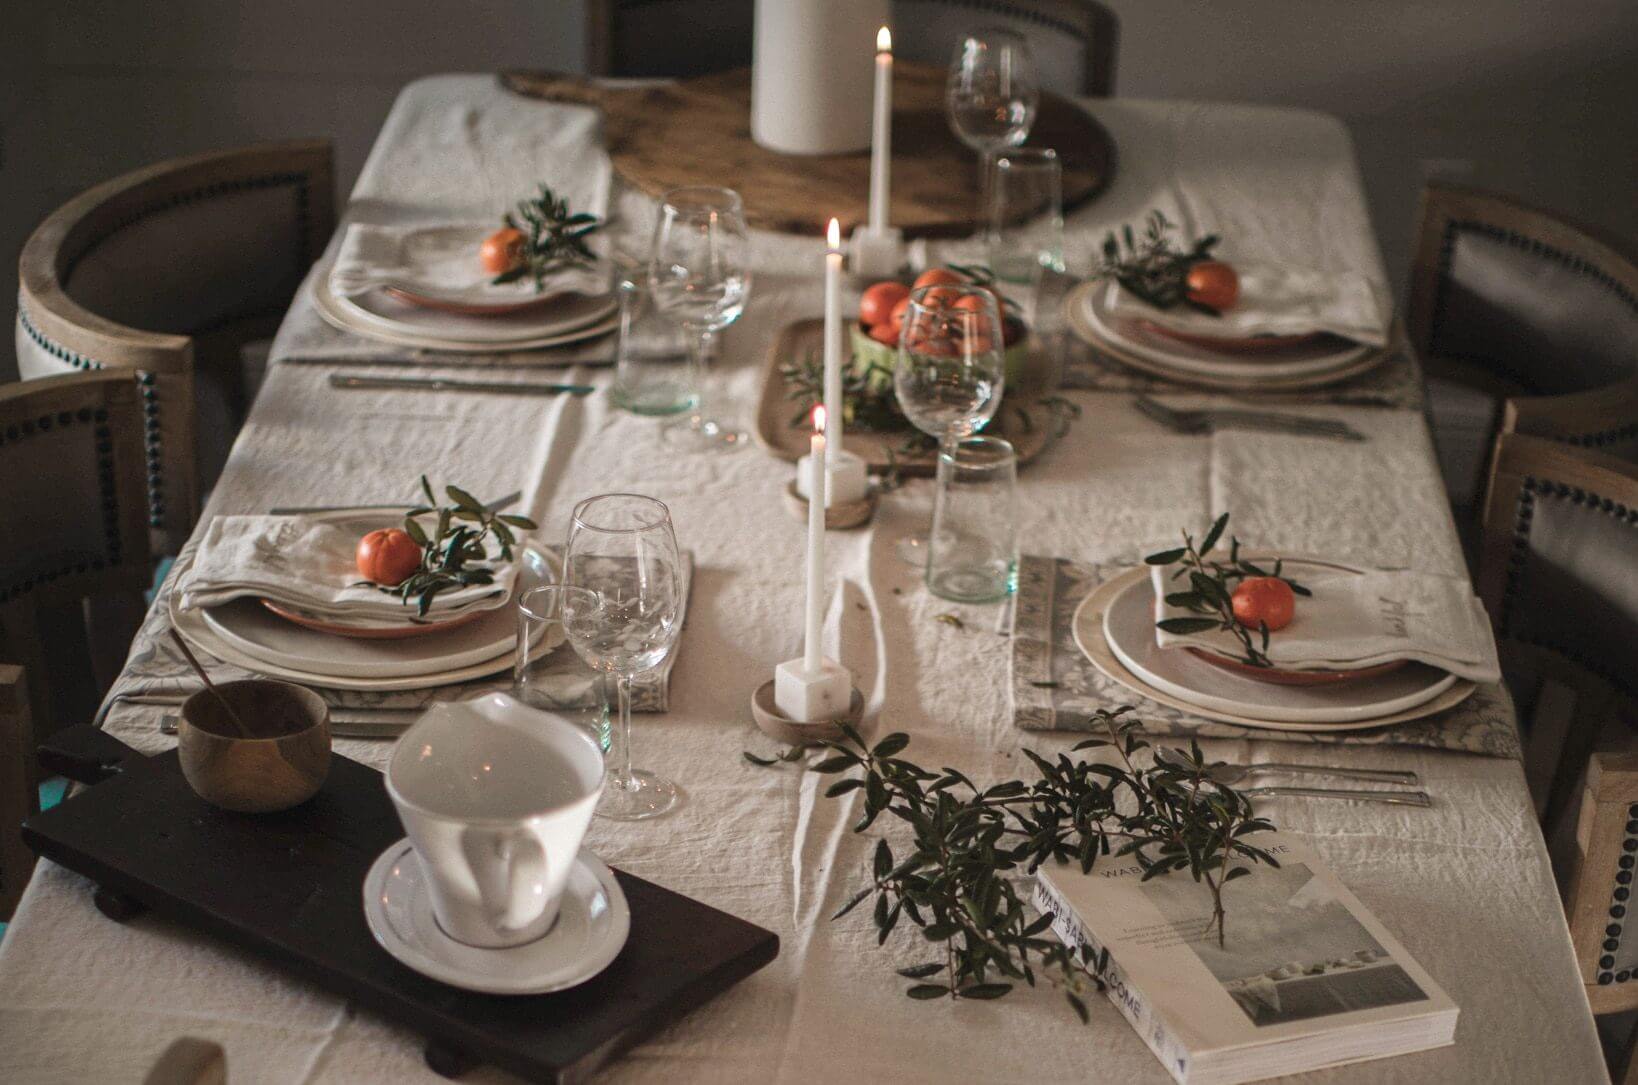 Neutral Holiday Tablescape with a pop of color from fruits and greenery